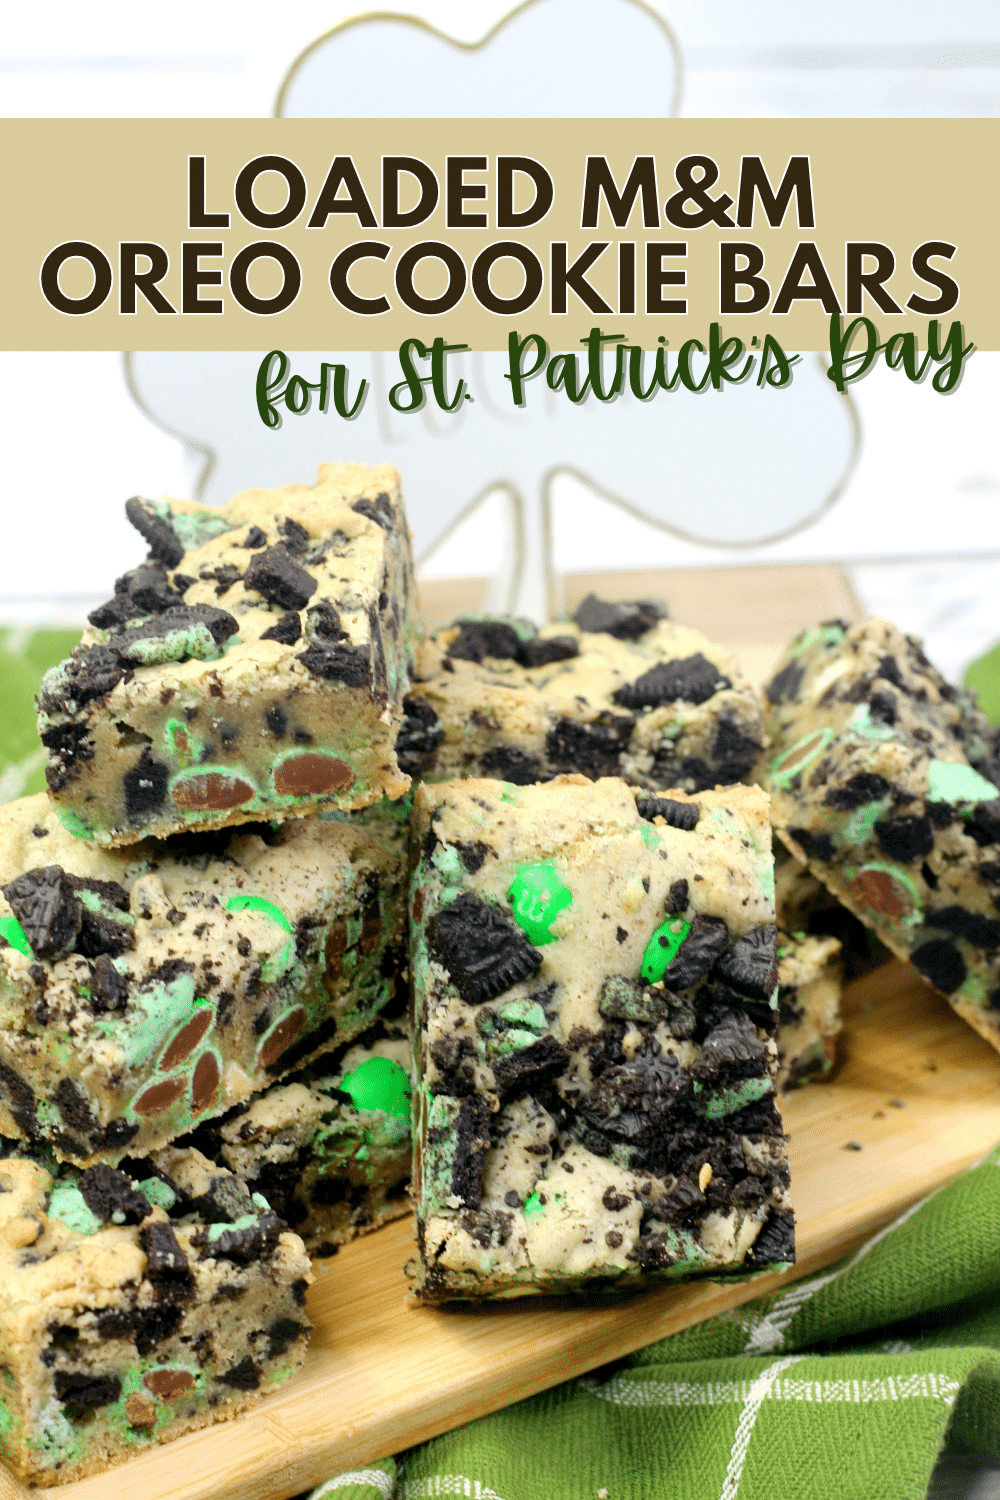 These Loaded M&M Oreo Cookie Bars for St. Patrick’s Day are soft, chewy and packed with sweet flavors. A perfect treat for the holiday! #loadedm&moreocookiebars #oreocookiebars #cookiebars #stpatricksday #holidaytreat via @wondermomwannab